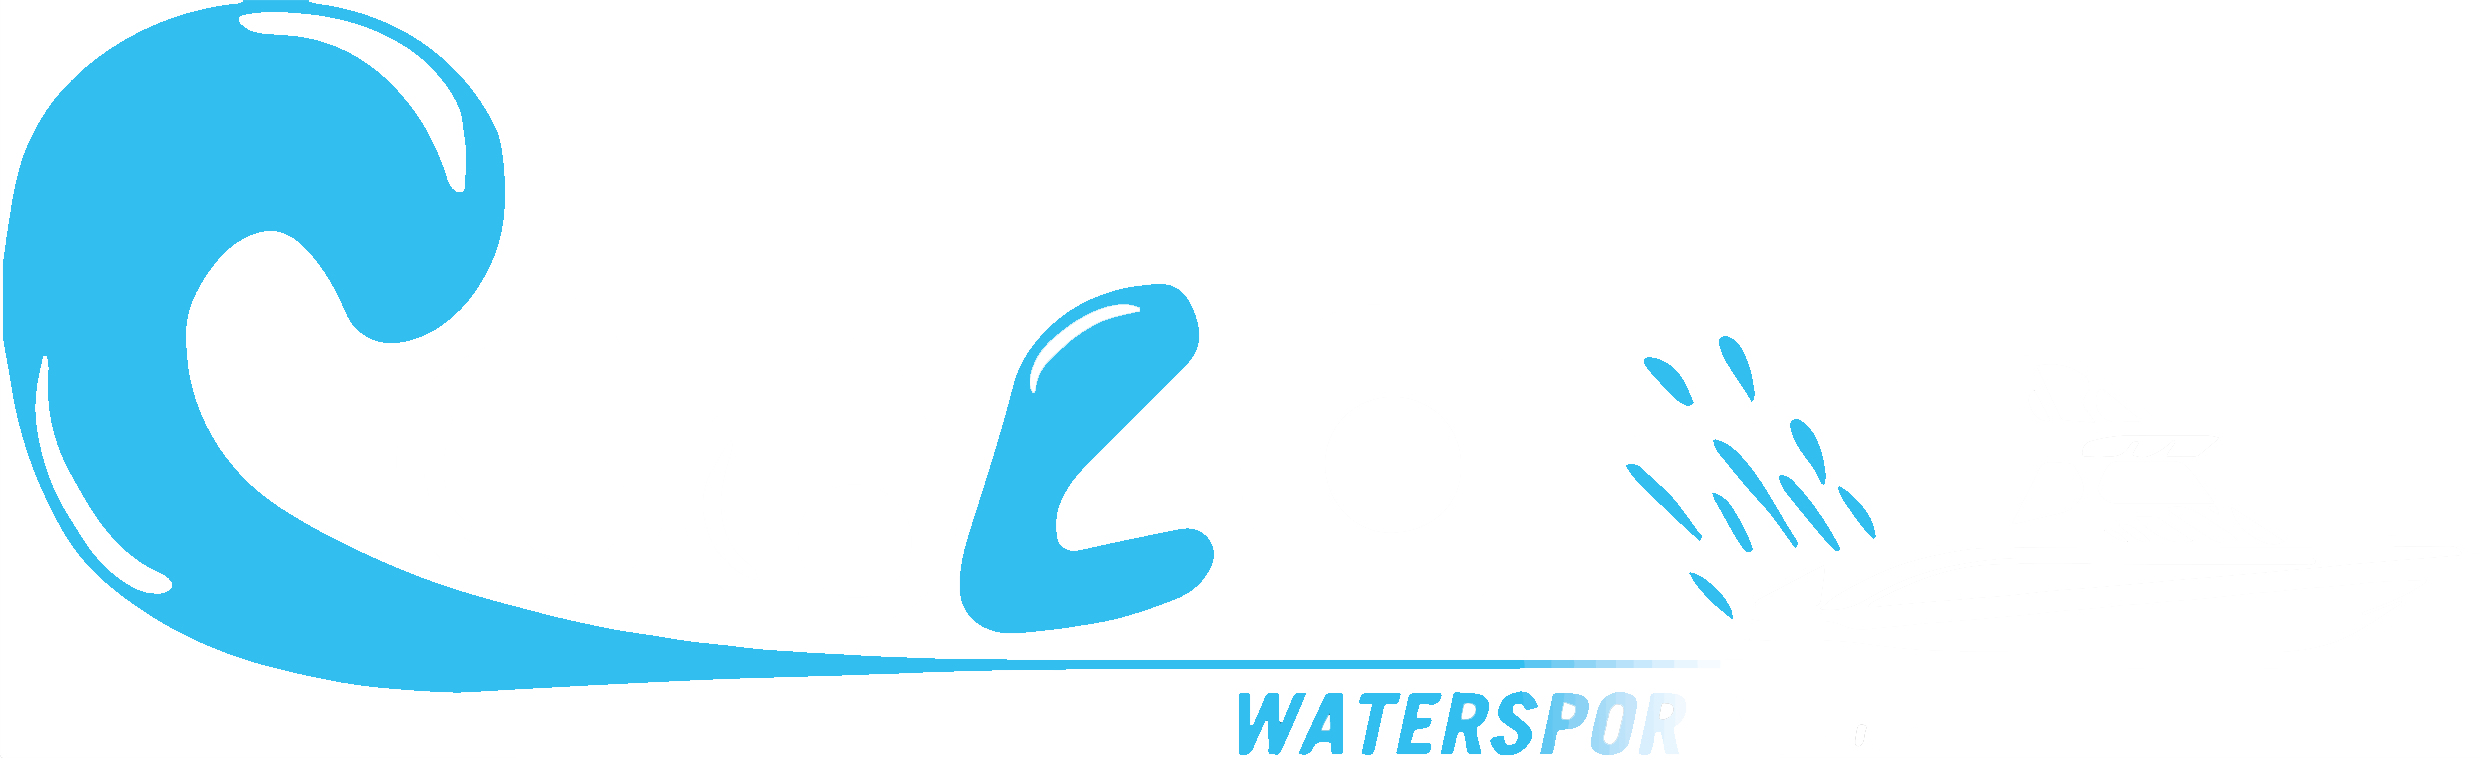 Coolo-WaterSports.com